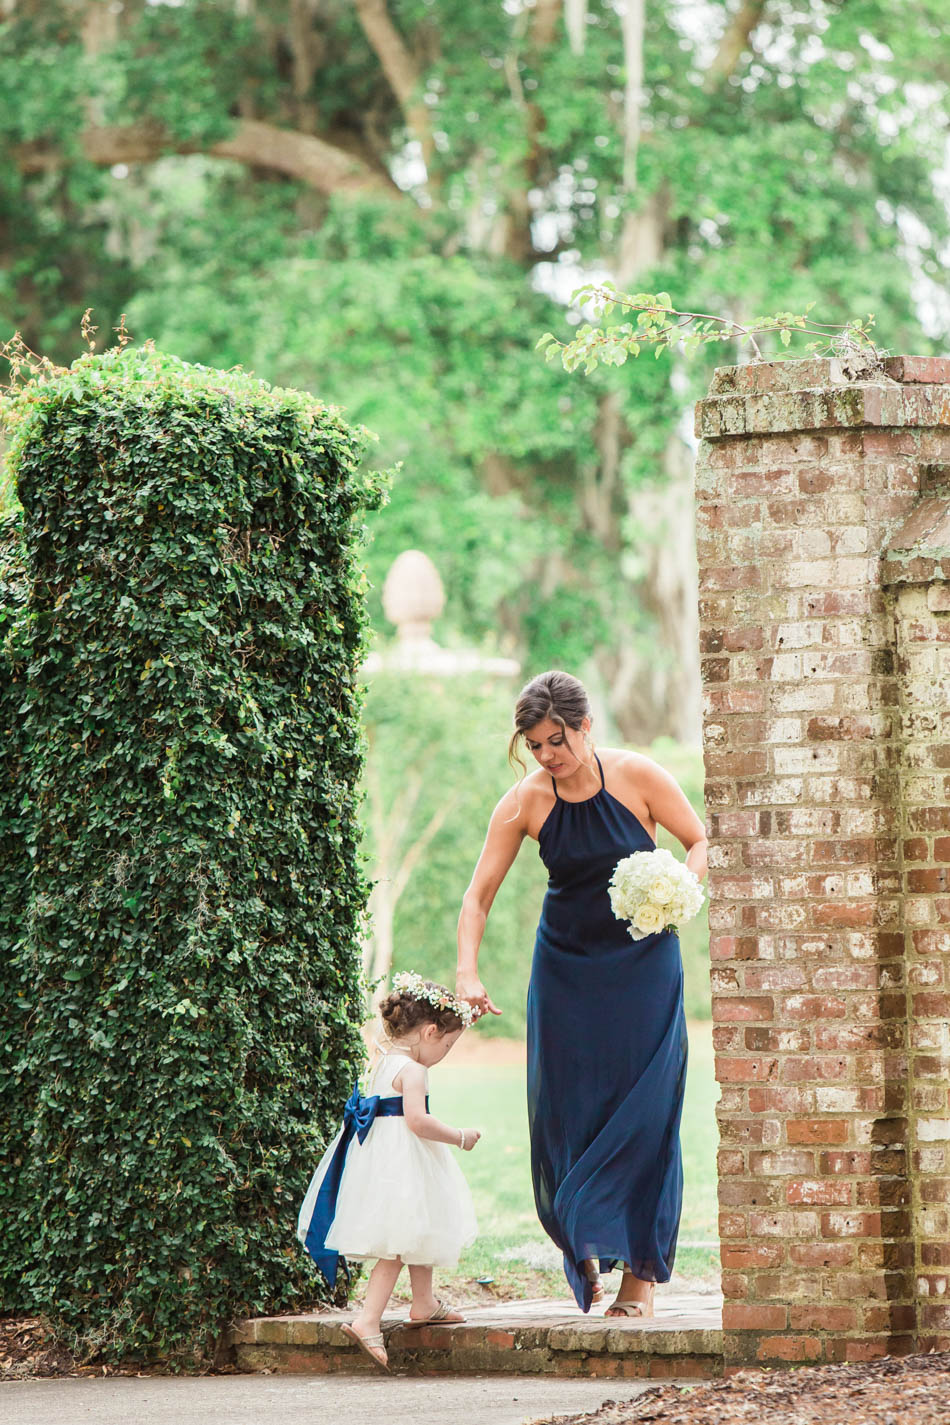 Flower girl steps into the garden, Dunes West Club, Mt Pleasant, South Carolina. Kate Timbers Photography. http://katetimbers.com